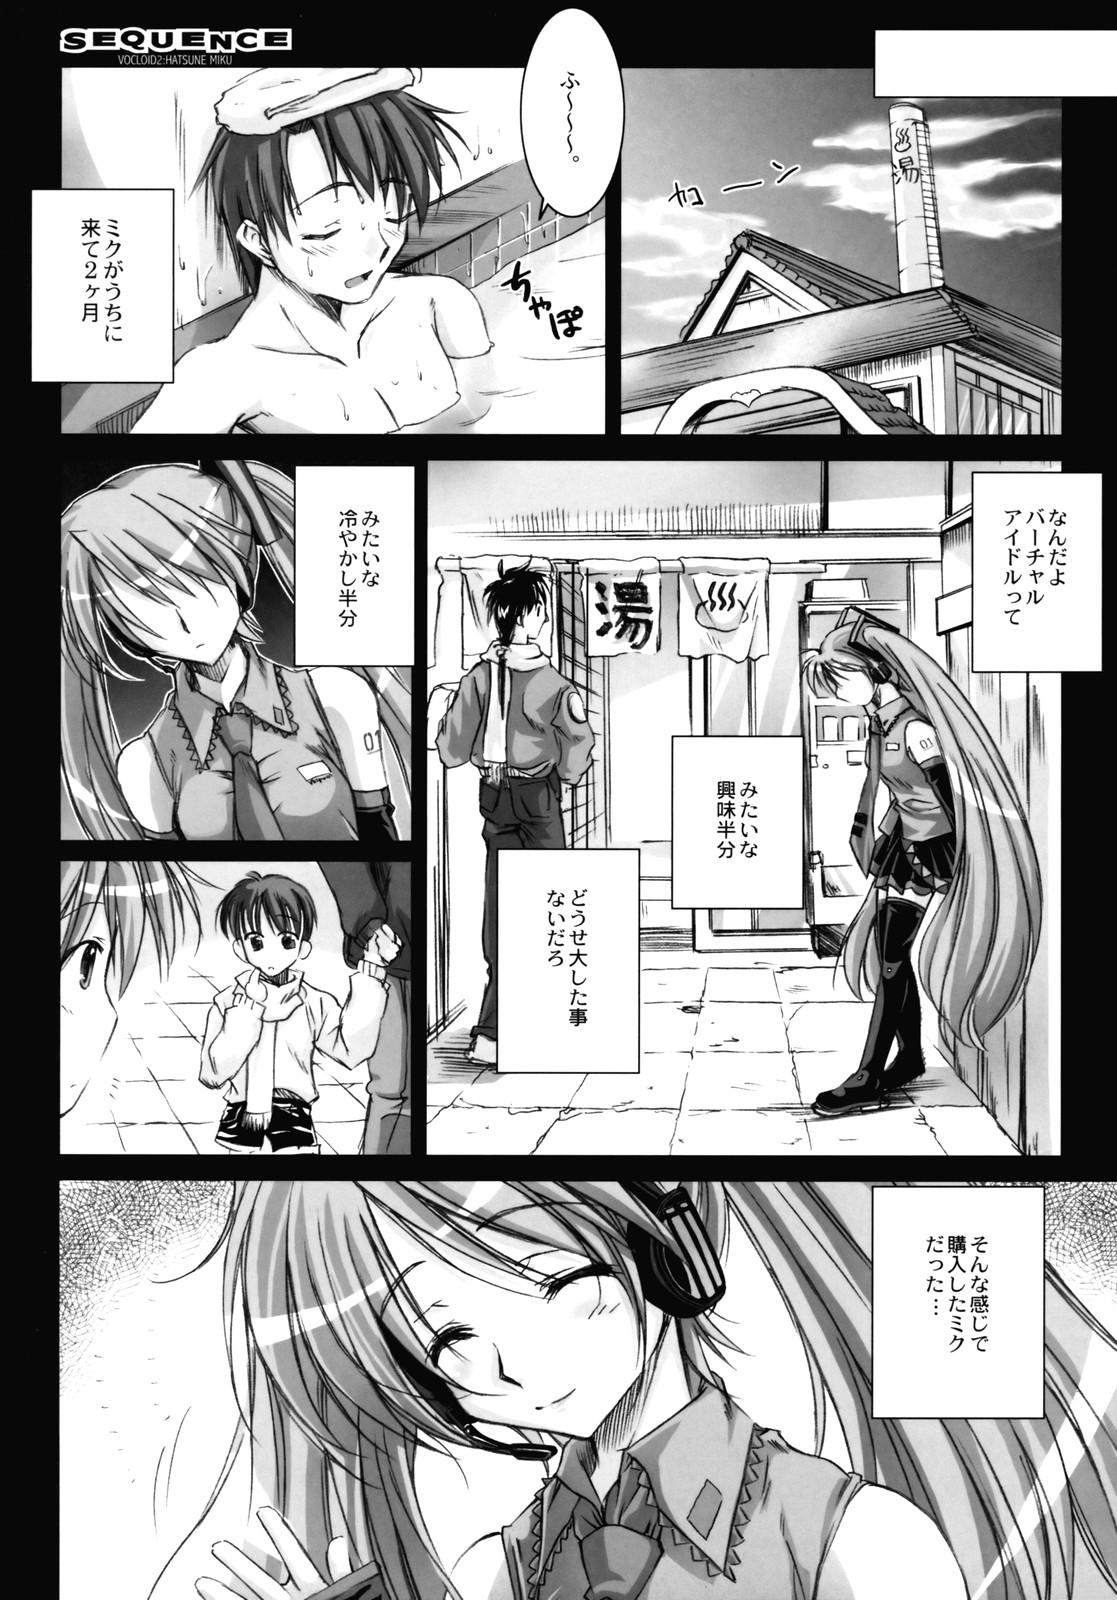 Teensex SEQUENCE - Vocaloid Aunty - Page 6